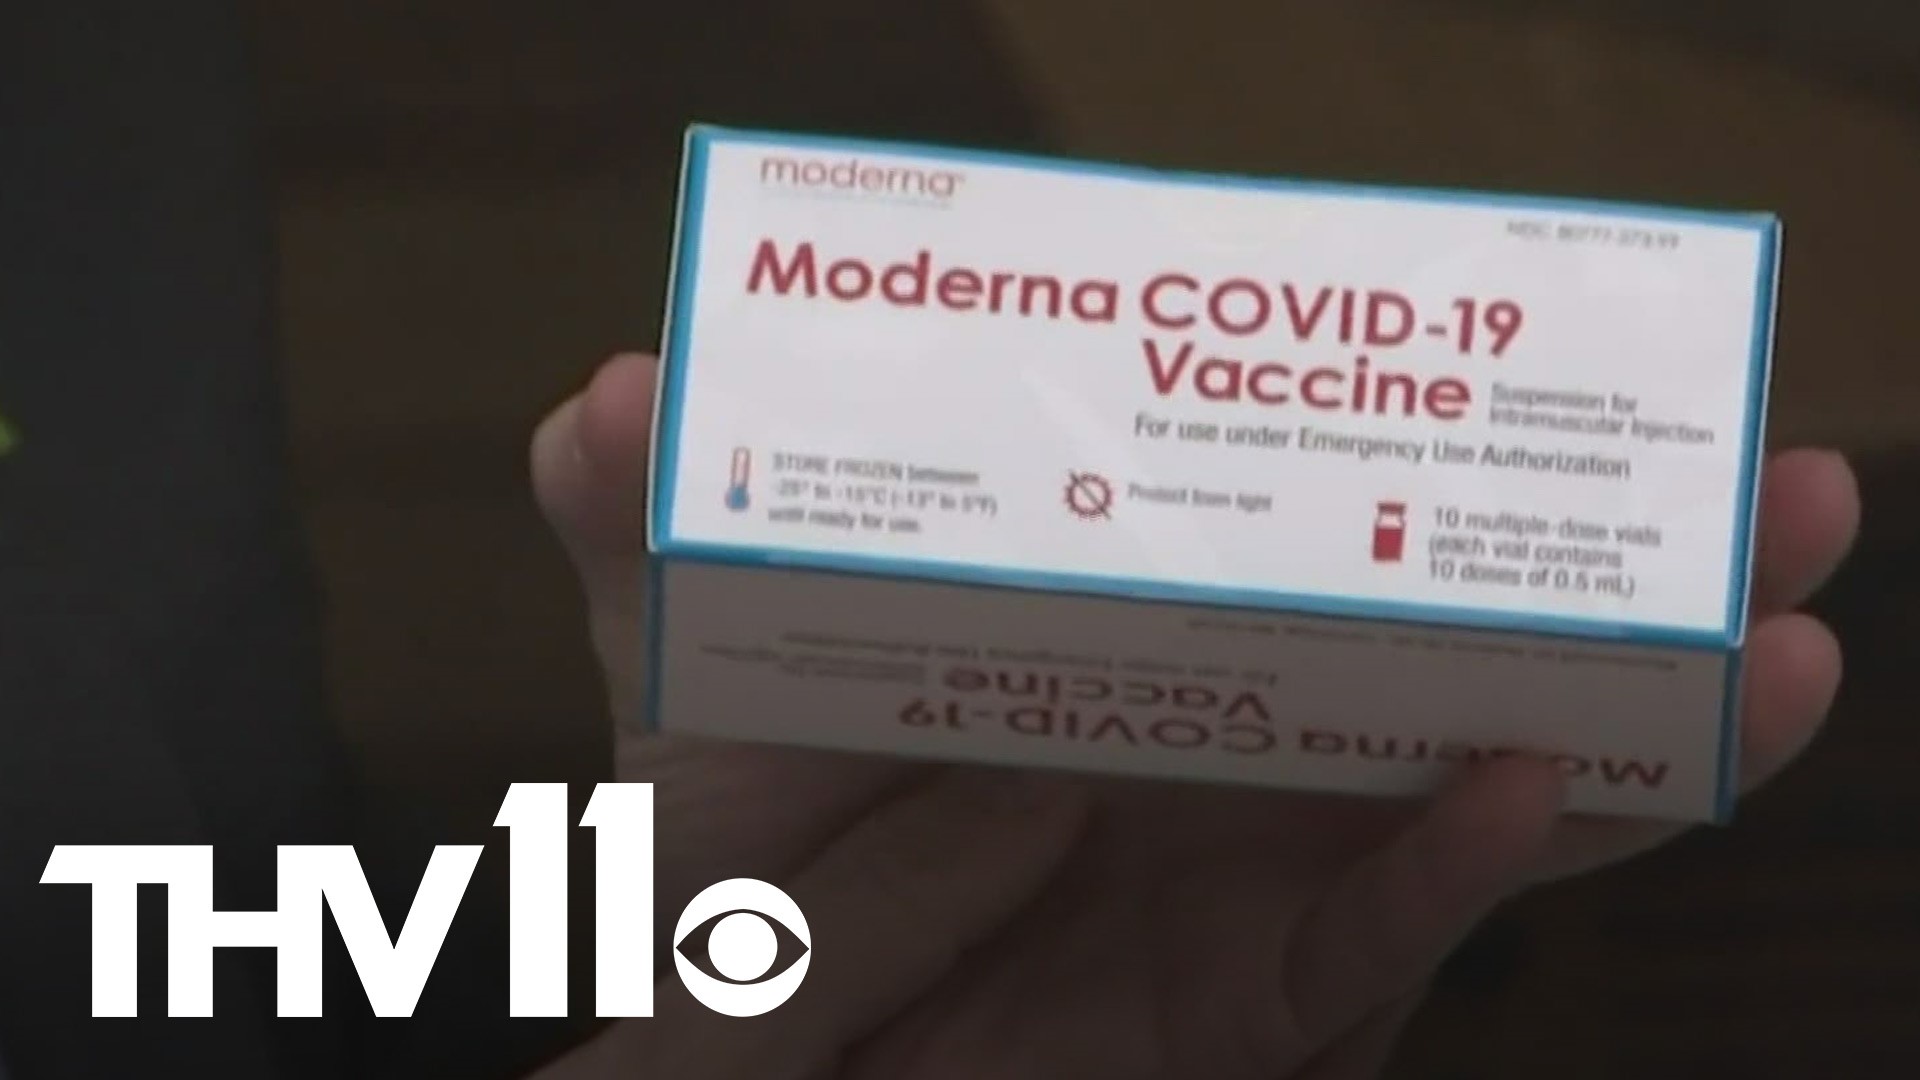 Arkansas began receiving shipments of the Moderna vaccine Monday with more coming. Mercedes Mackay tells us how pharmacies are preparing to distribute it.